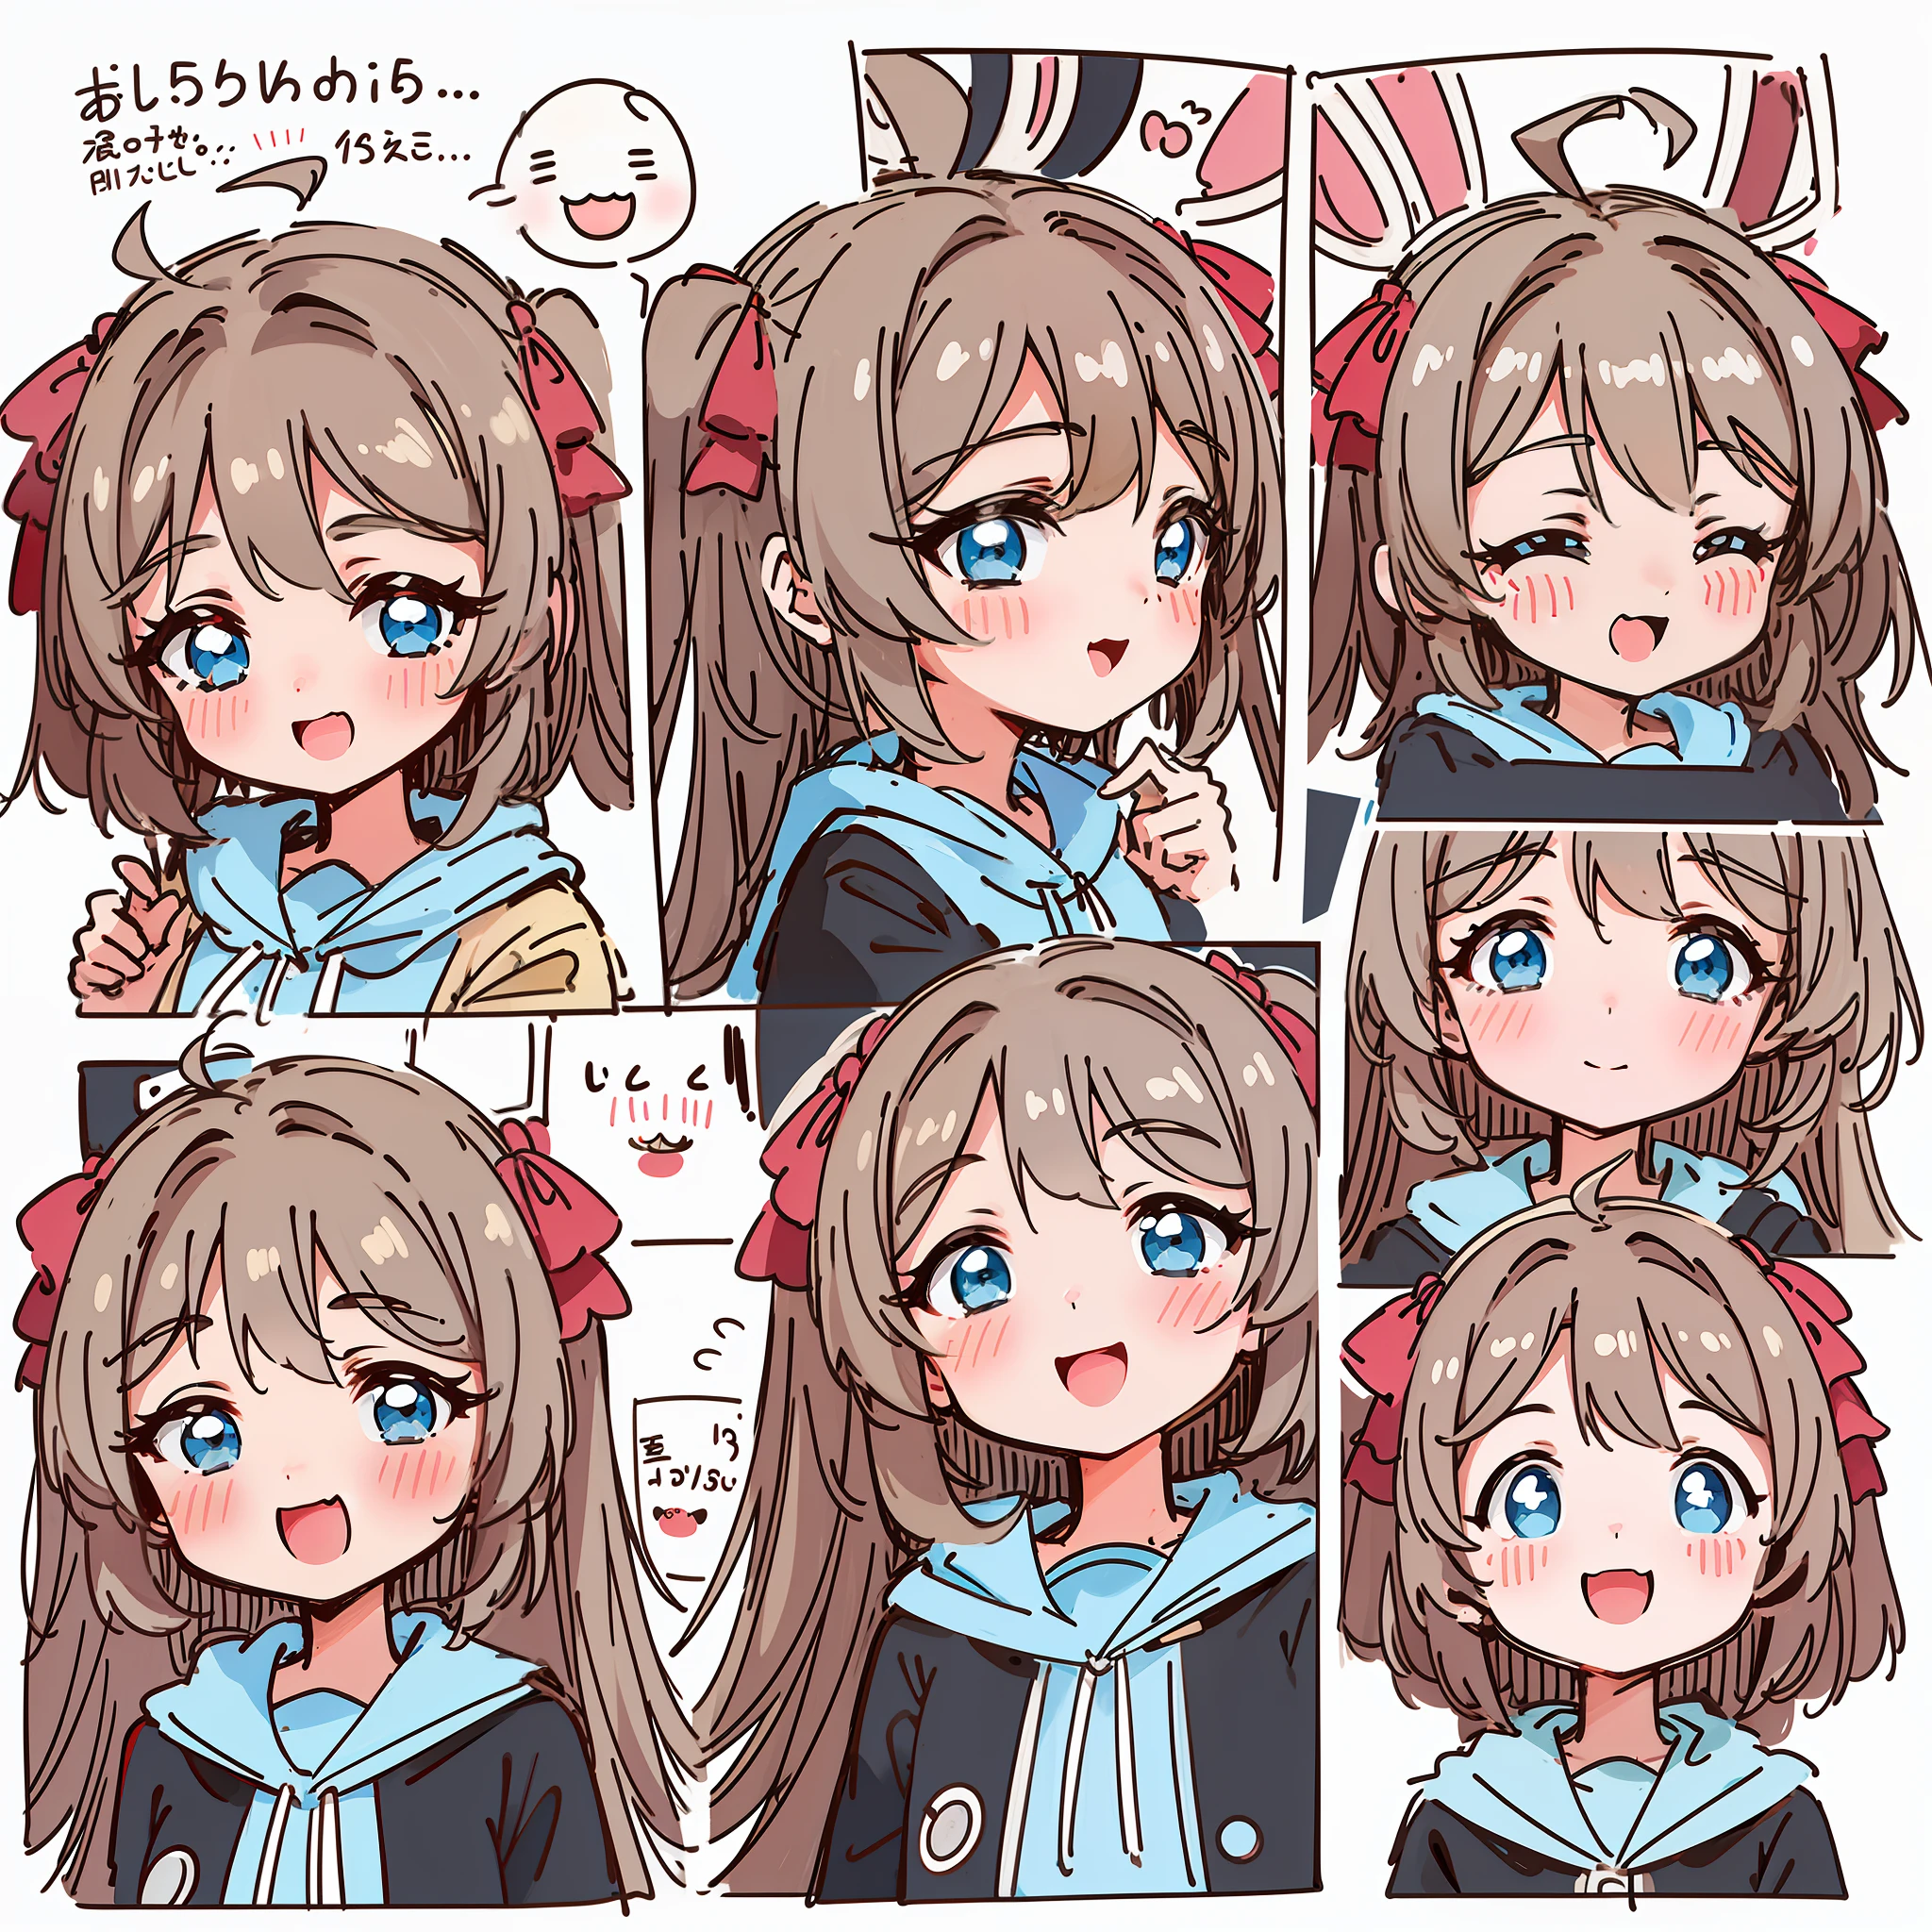 a cute monkey, all
kinds of expressions, happpy, sad, angry, expectant
laughter, disappointed1, cute eyes, white
background, illustration-nii 5-style cute, emoji
as illustration set, with boold manga line style,
dynamic pose dark white,, f/64 group, related
characters, Old Meme Kernel